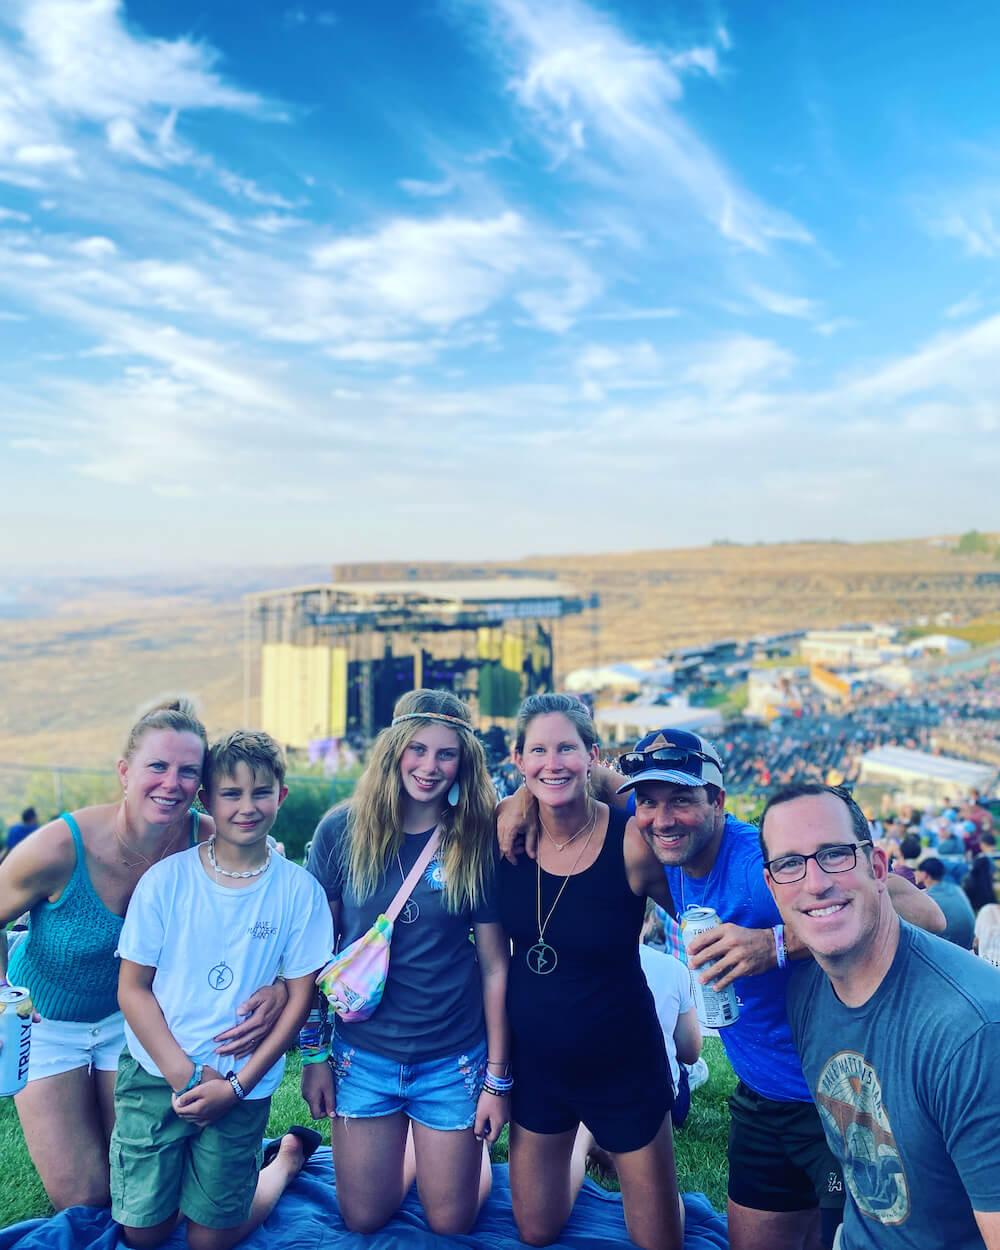 DMB at The Gorge